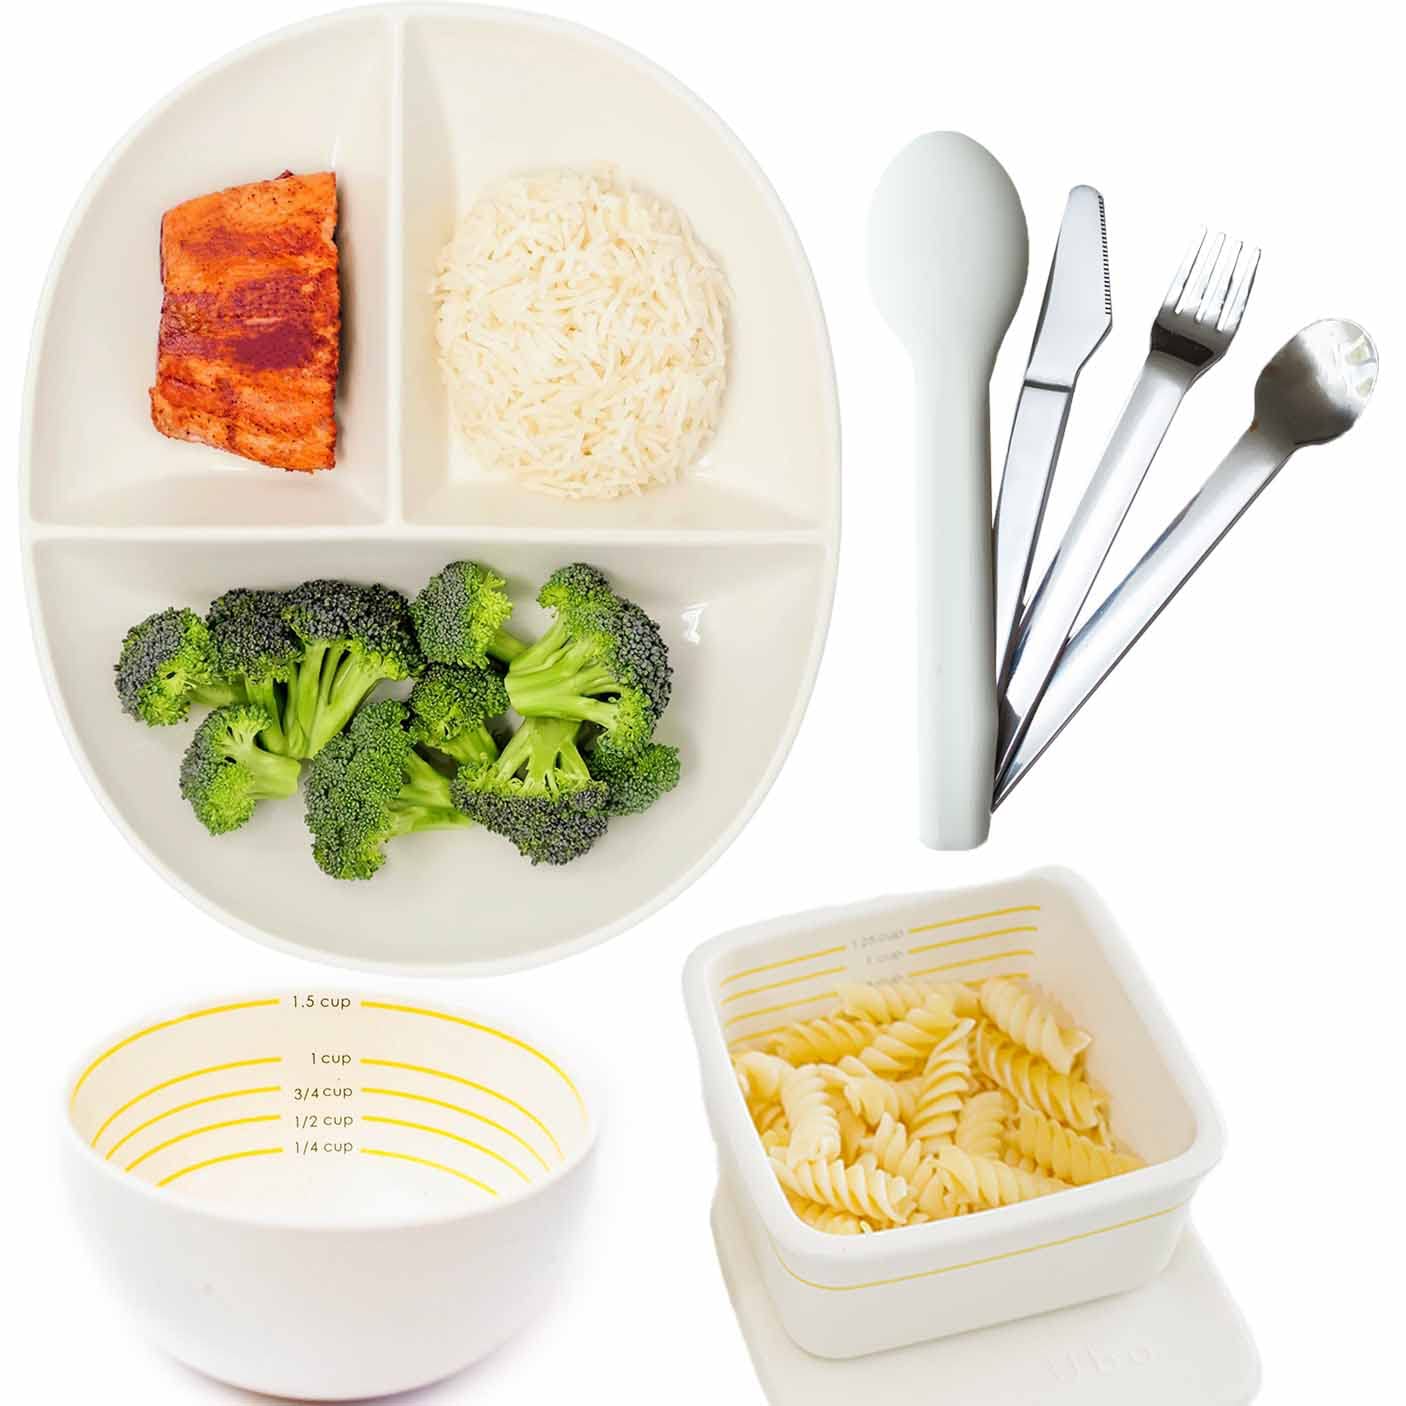 Portion Control Bowls for Healthy Eating & Weight Loss